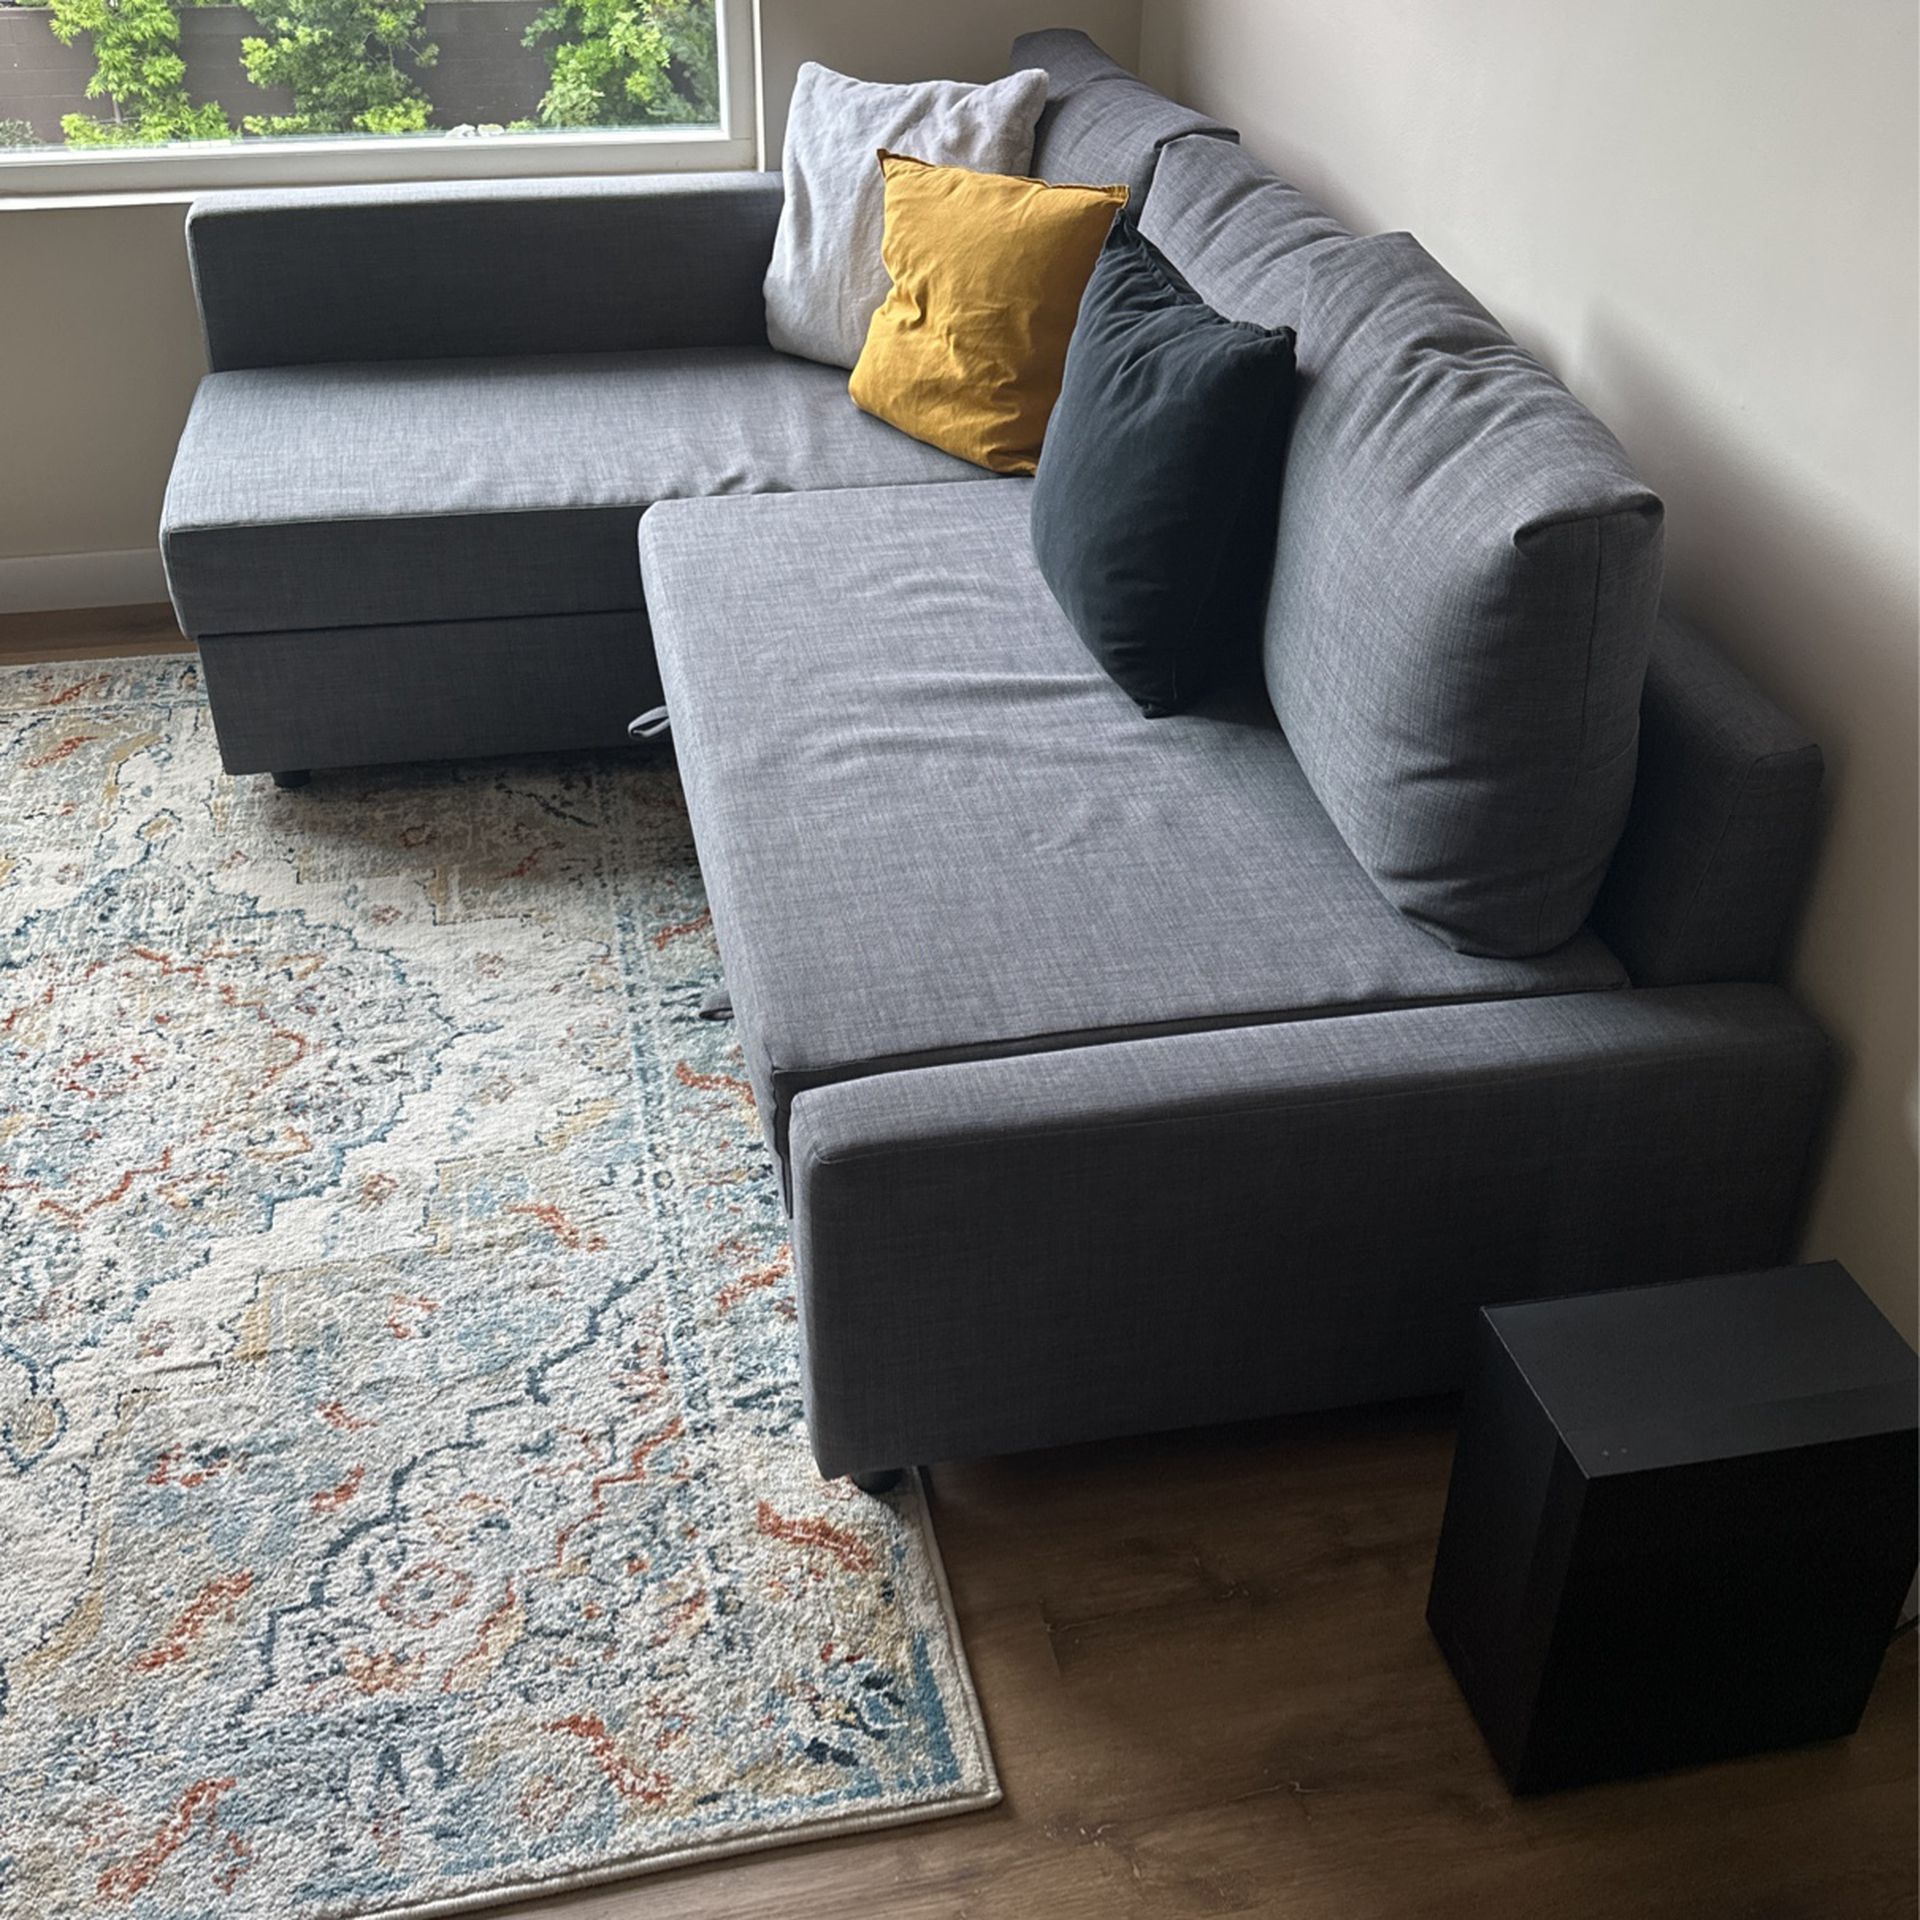 Couch - Sleeper Sectional IKEA